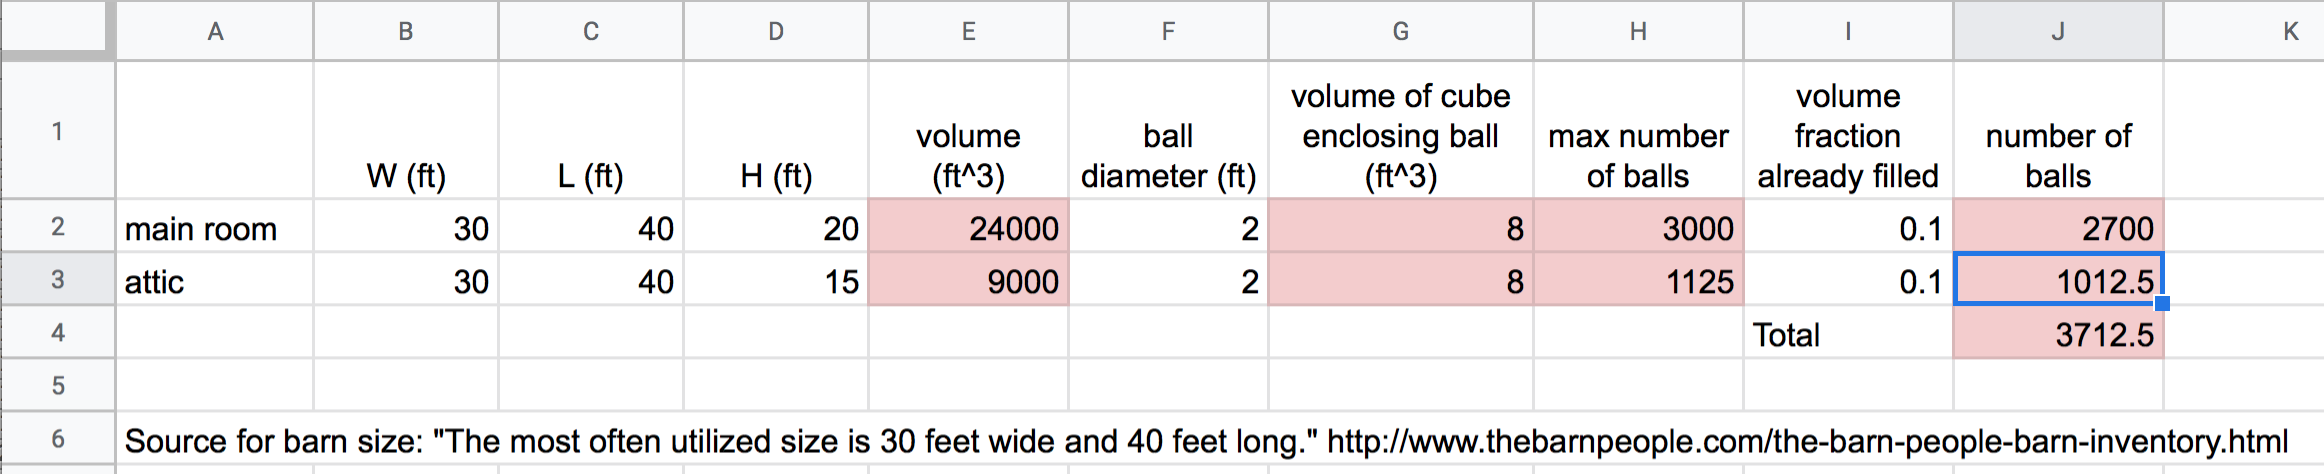 Estimation of maximum number of beach balls that could colonize a barn. Cells in red are computed.